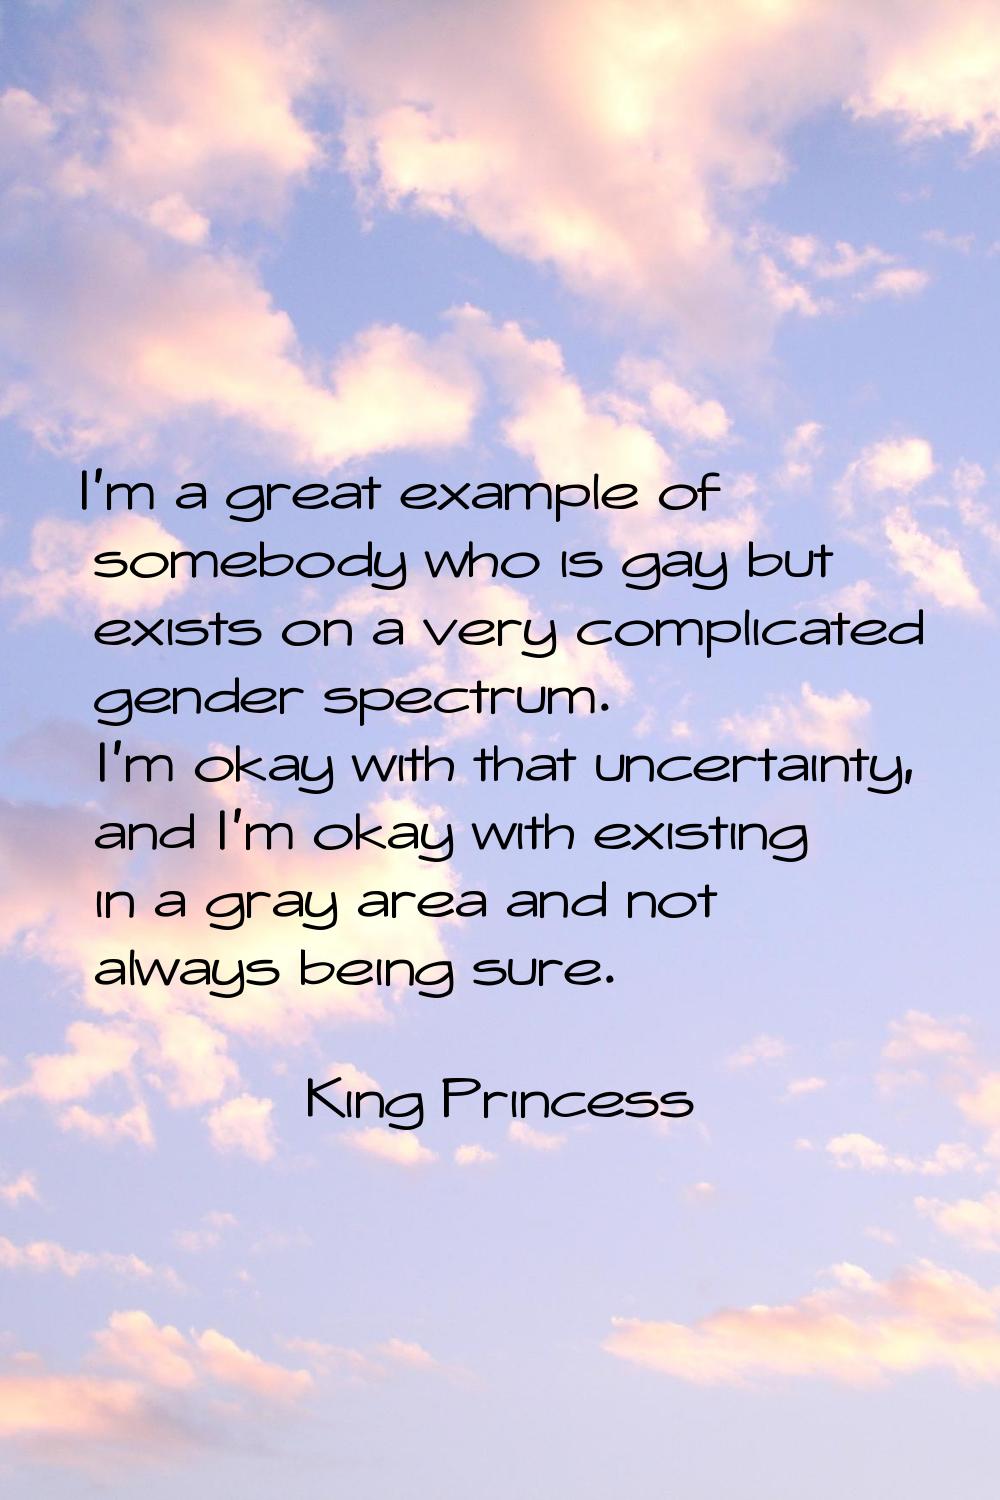 I'm a great example of somebody who is gay but exists on a very complicated gender spectrum. I'm ok